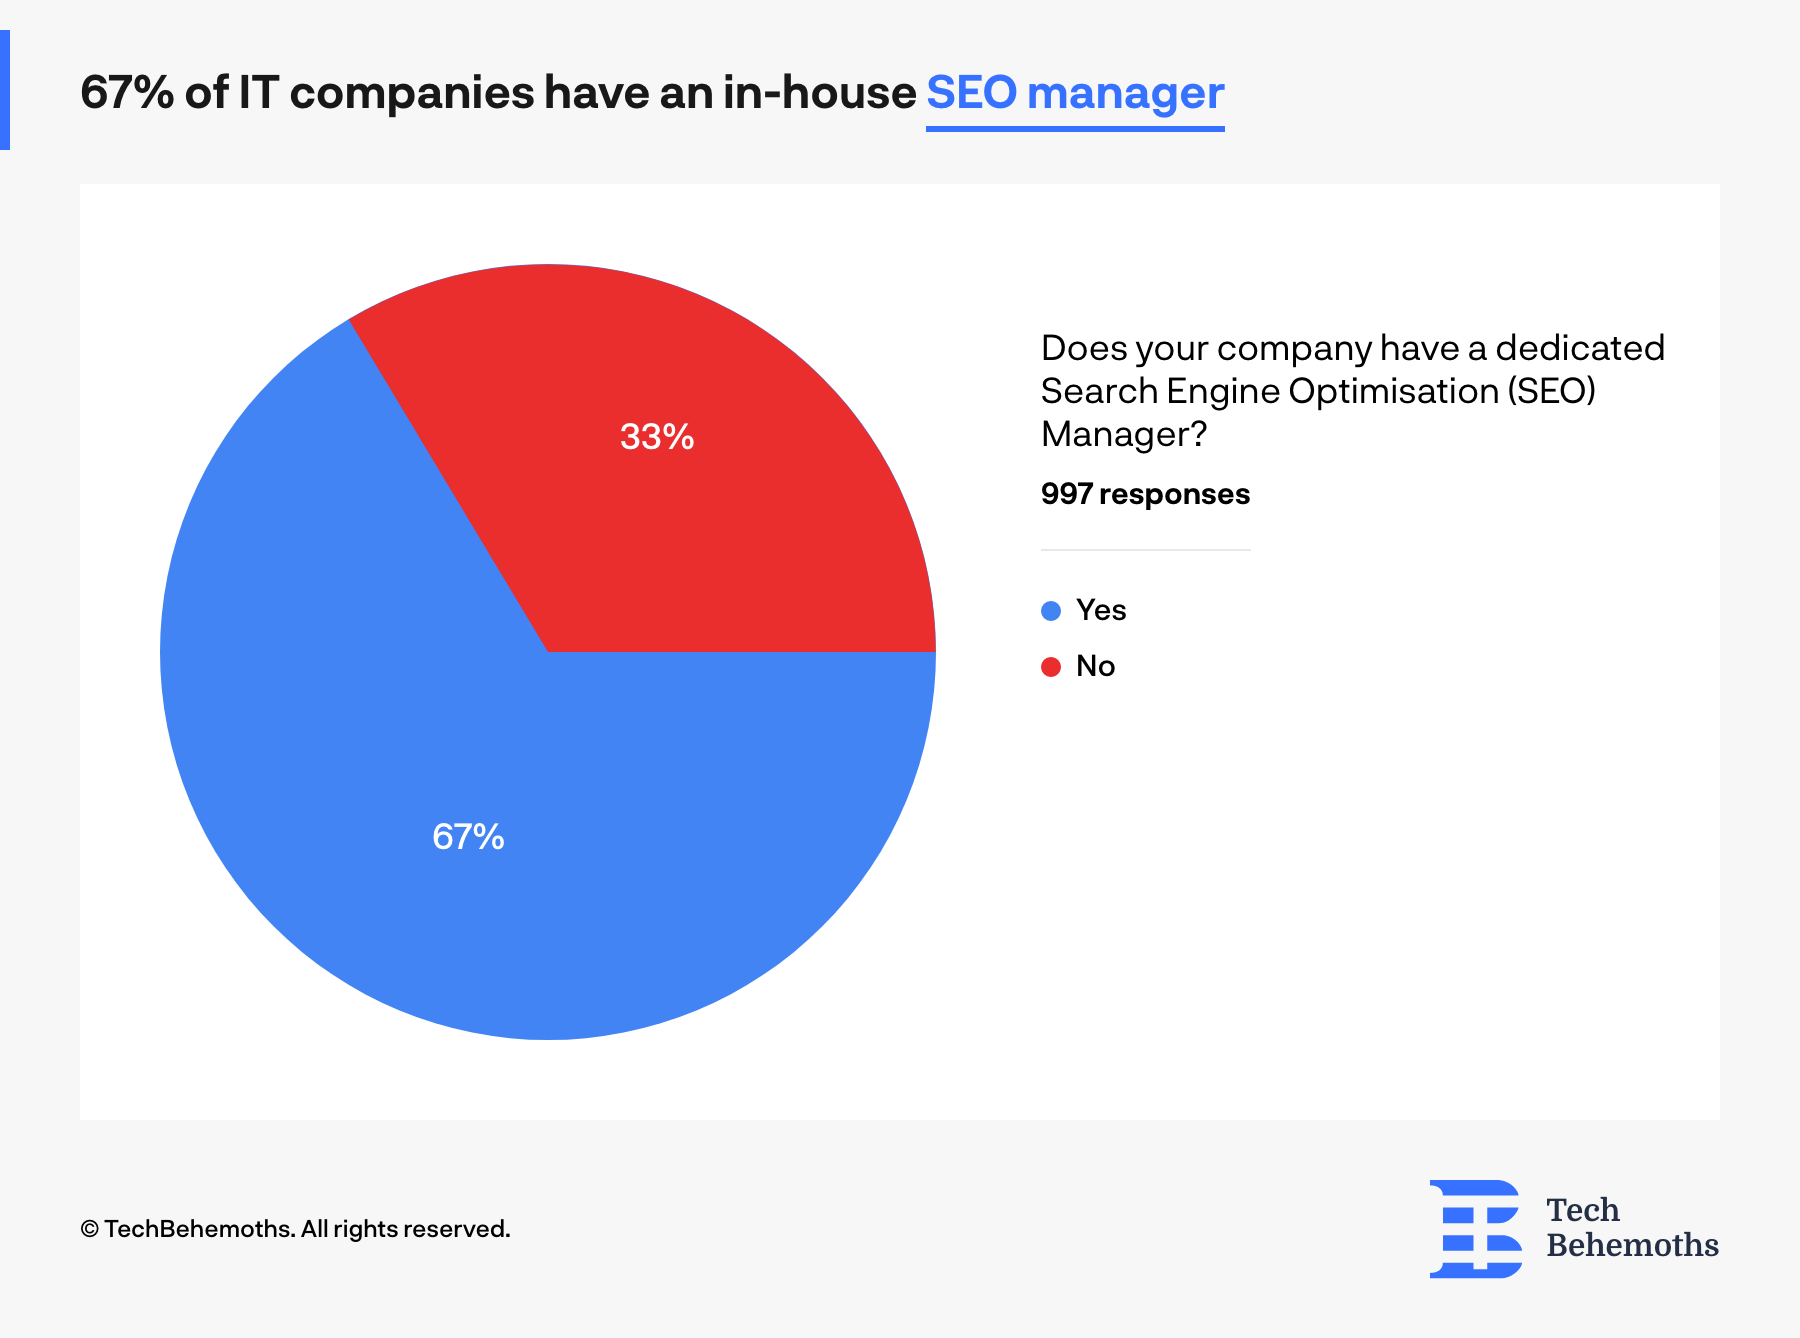 67% of IT companies have an in-house SEO manager